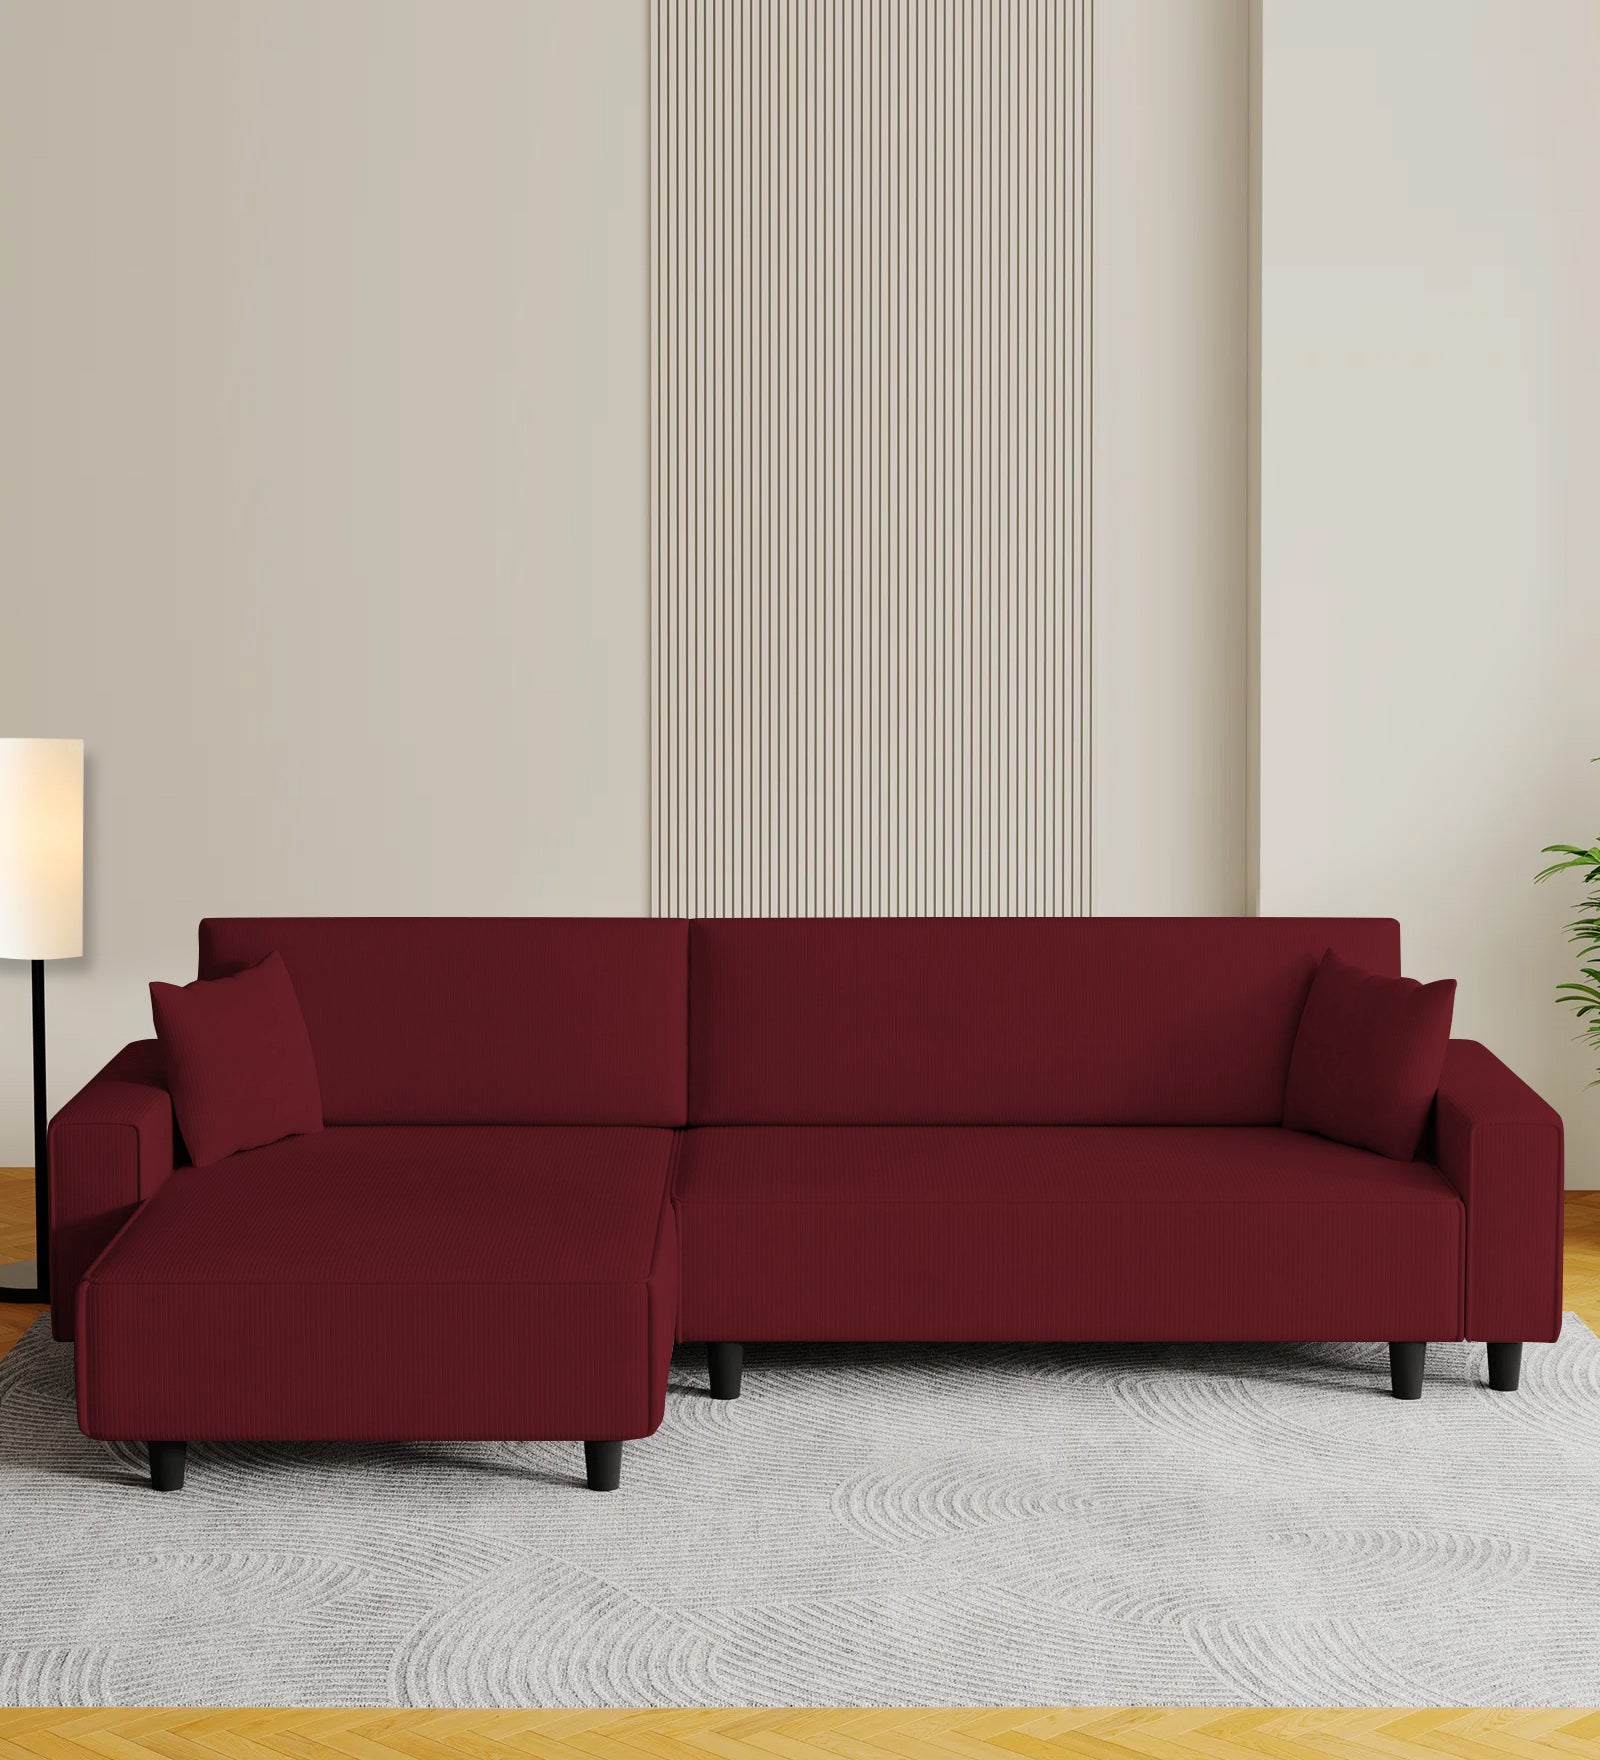 Peach Fabric RHS 6 Seater Sectional Sofa Cum Bed With Storage In Blood Maroon Colour